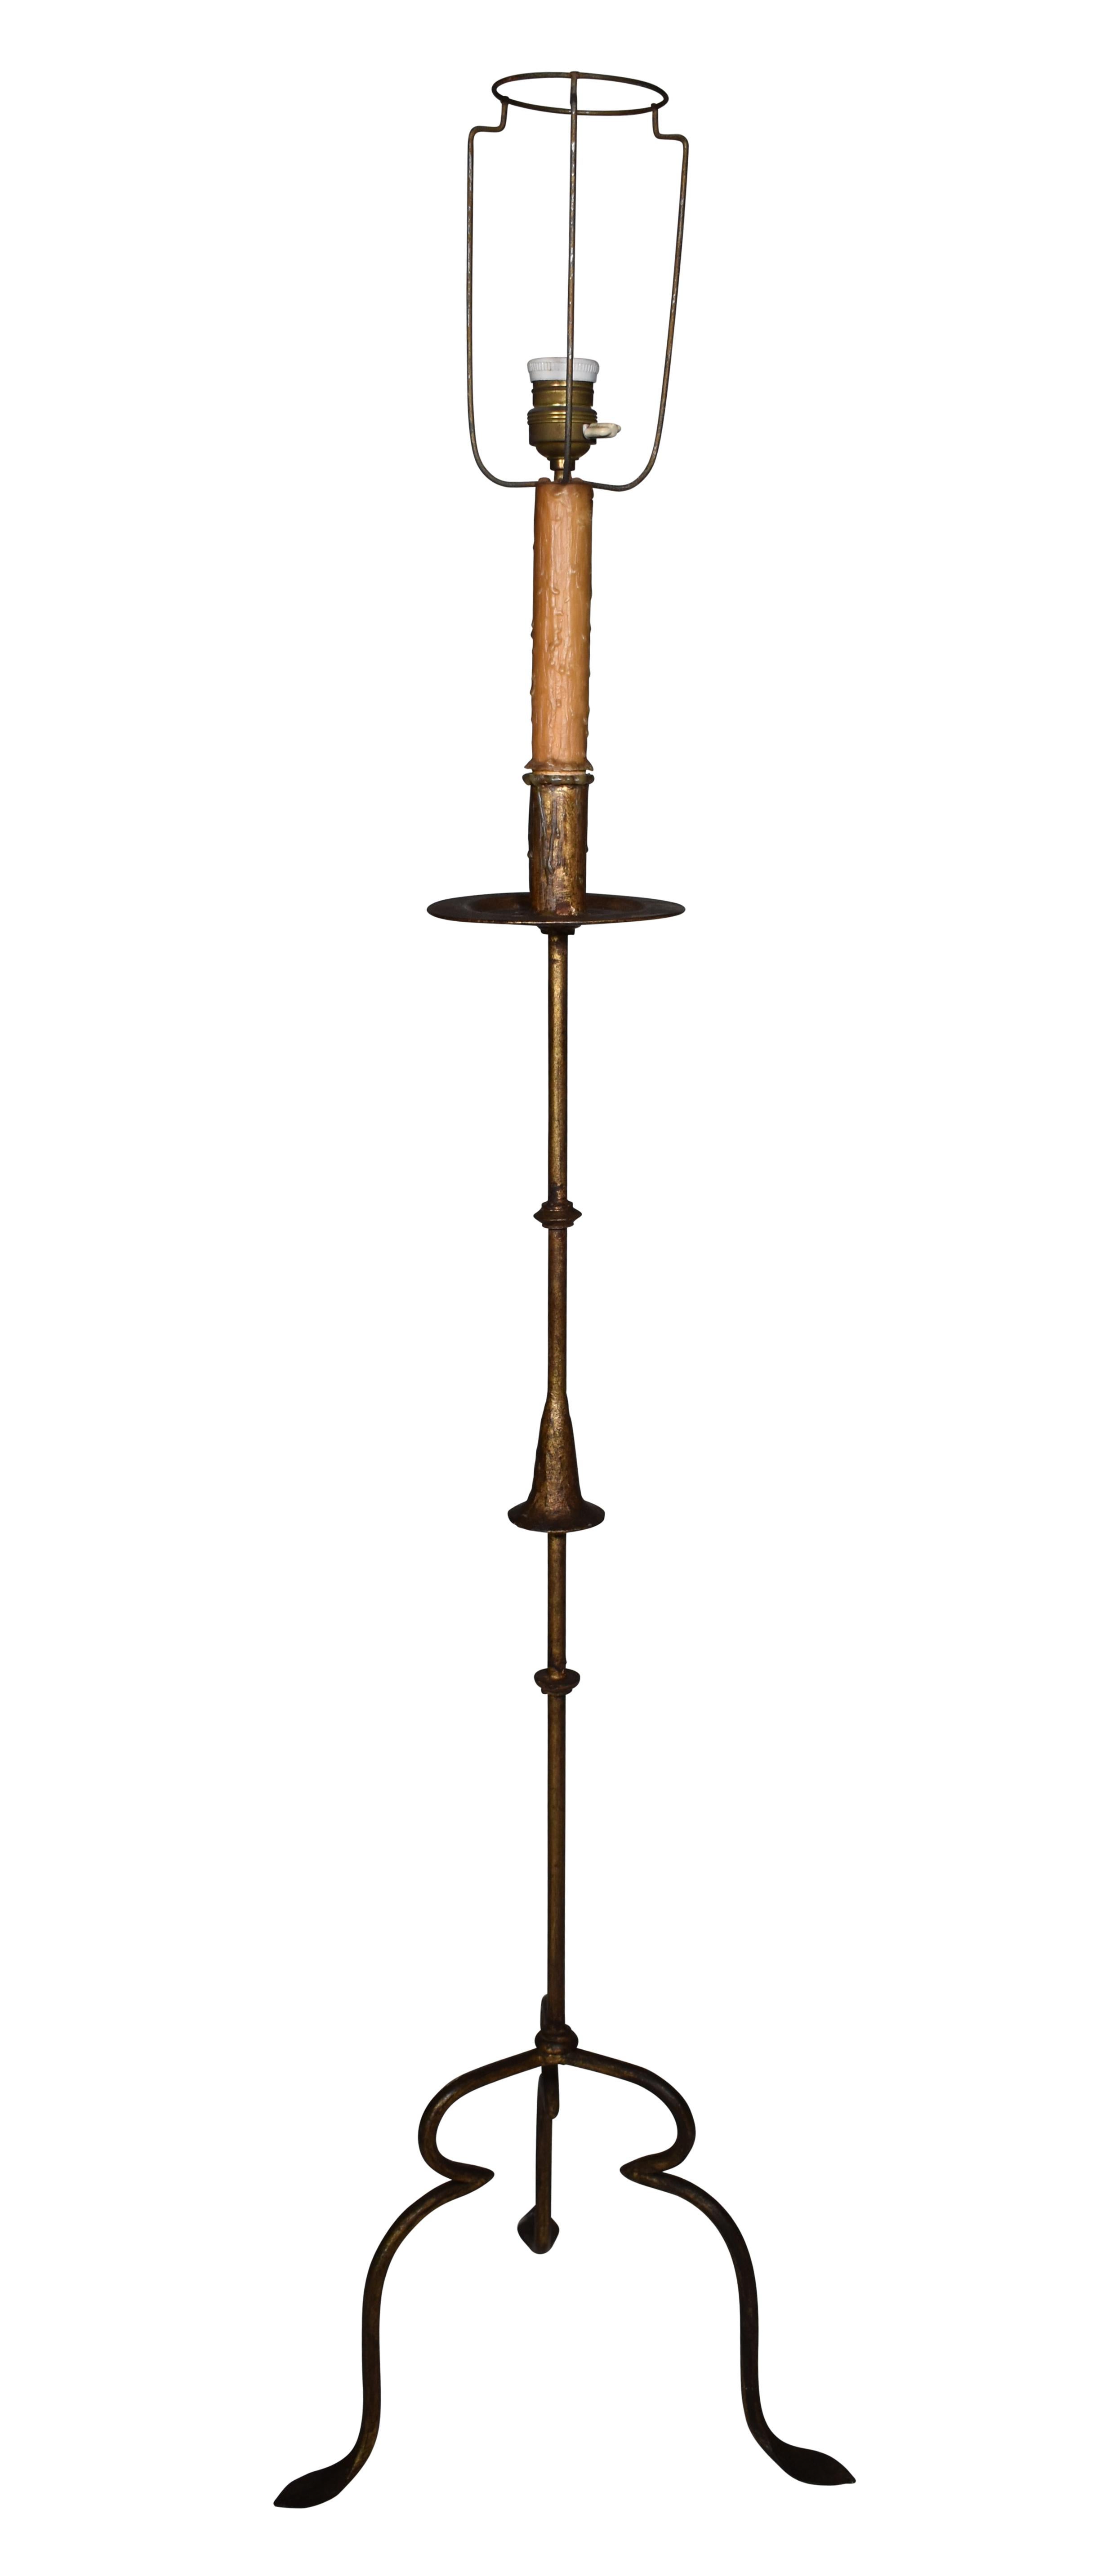 Vintage gilded iron torchier converted into a floor lamp. European wiring - must be rewired to use in US.